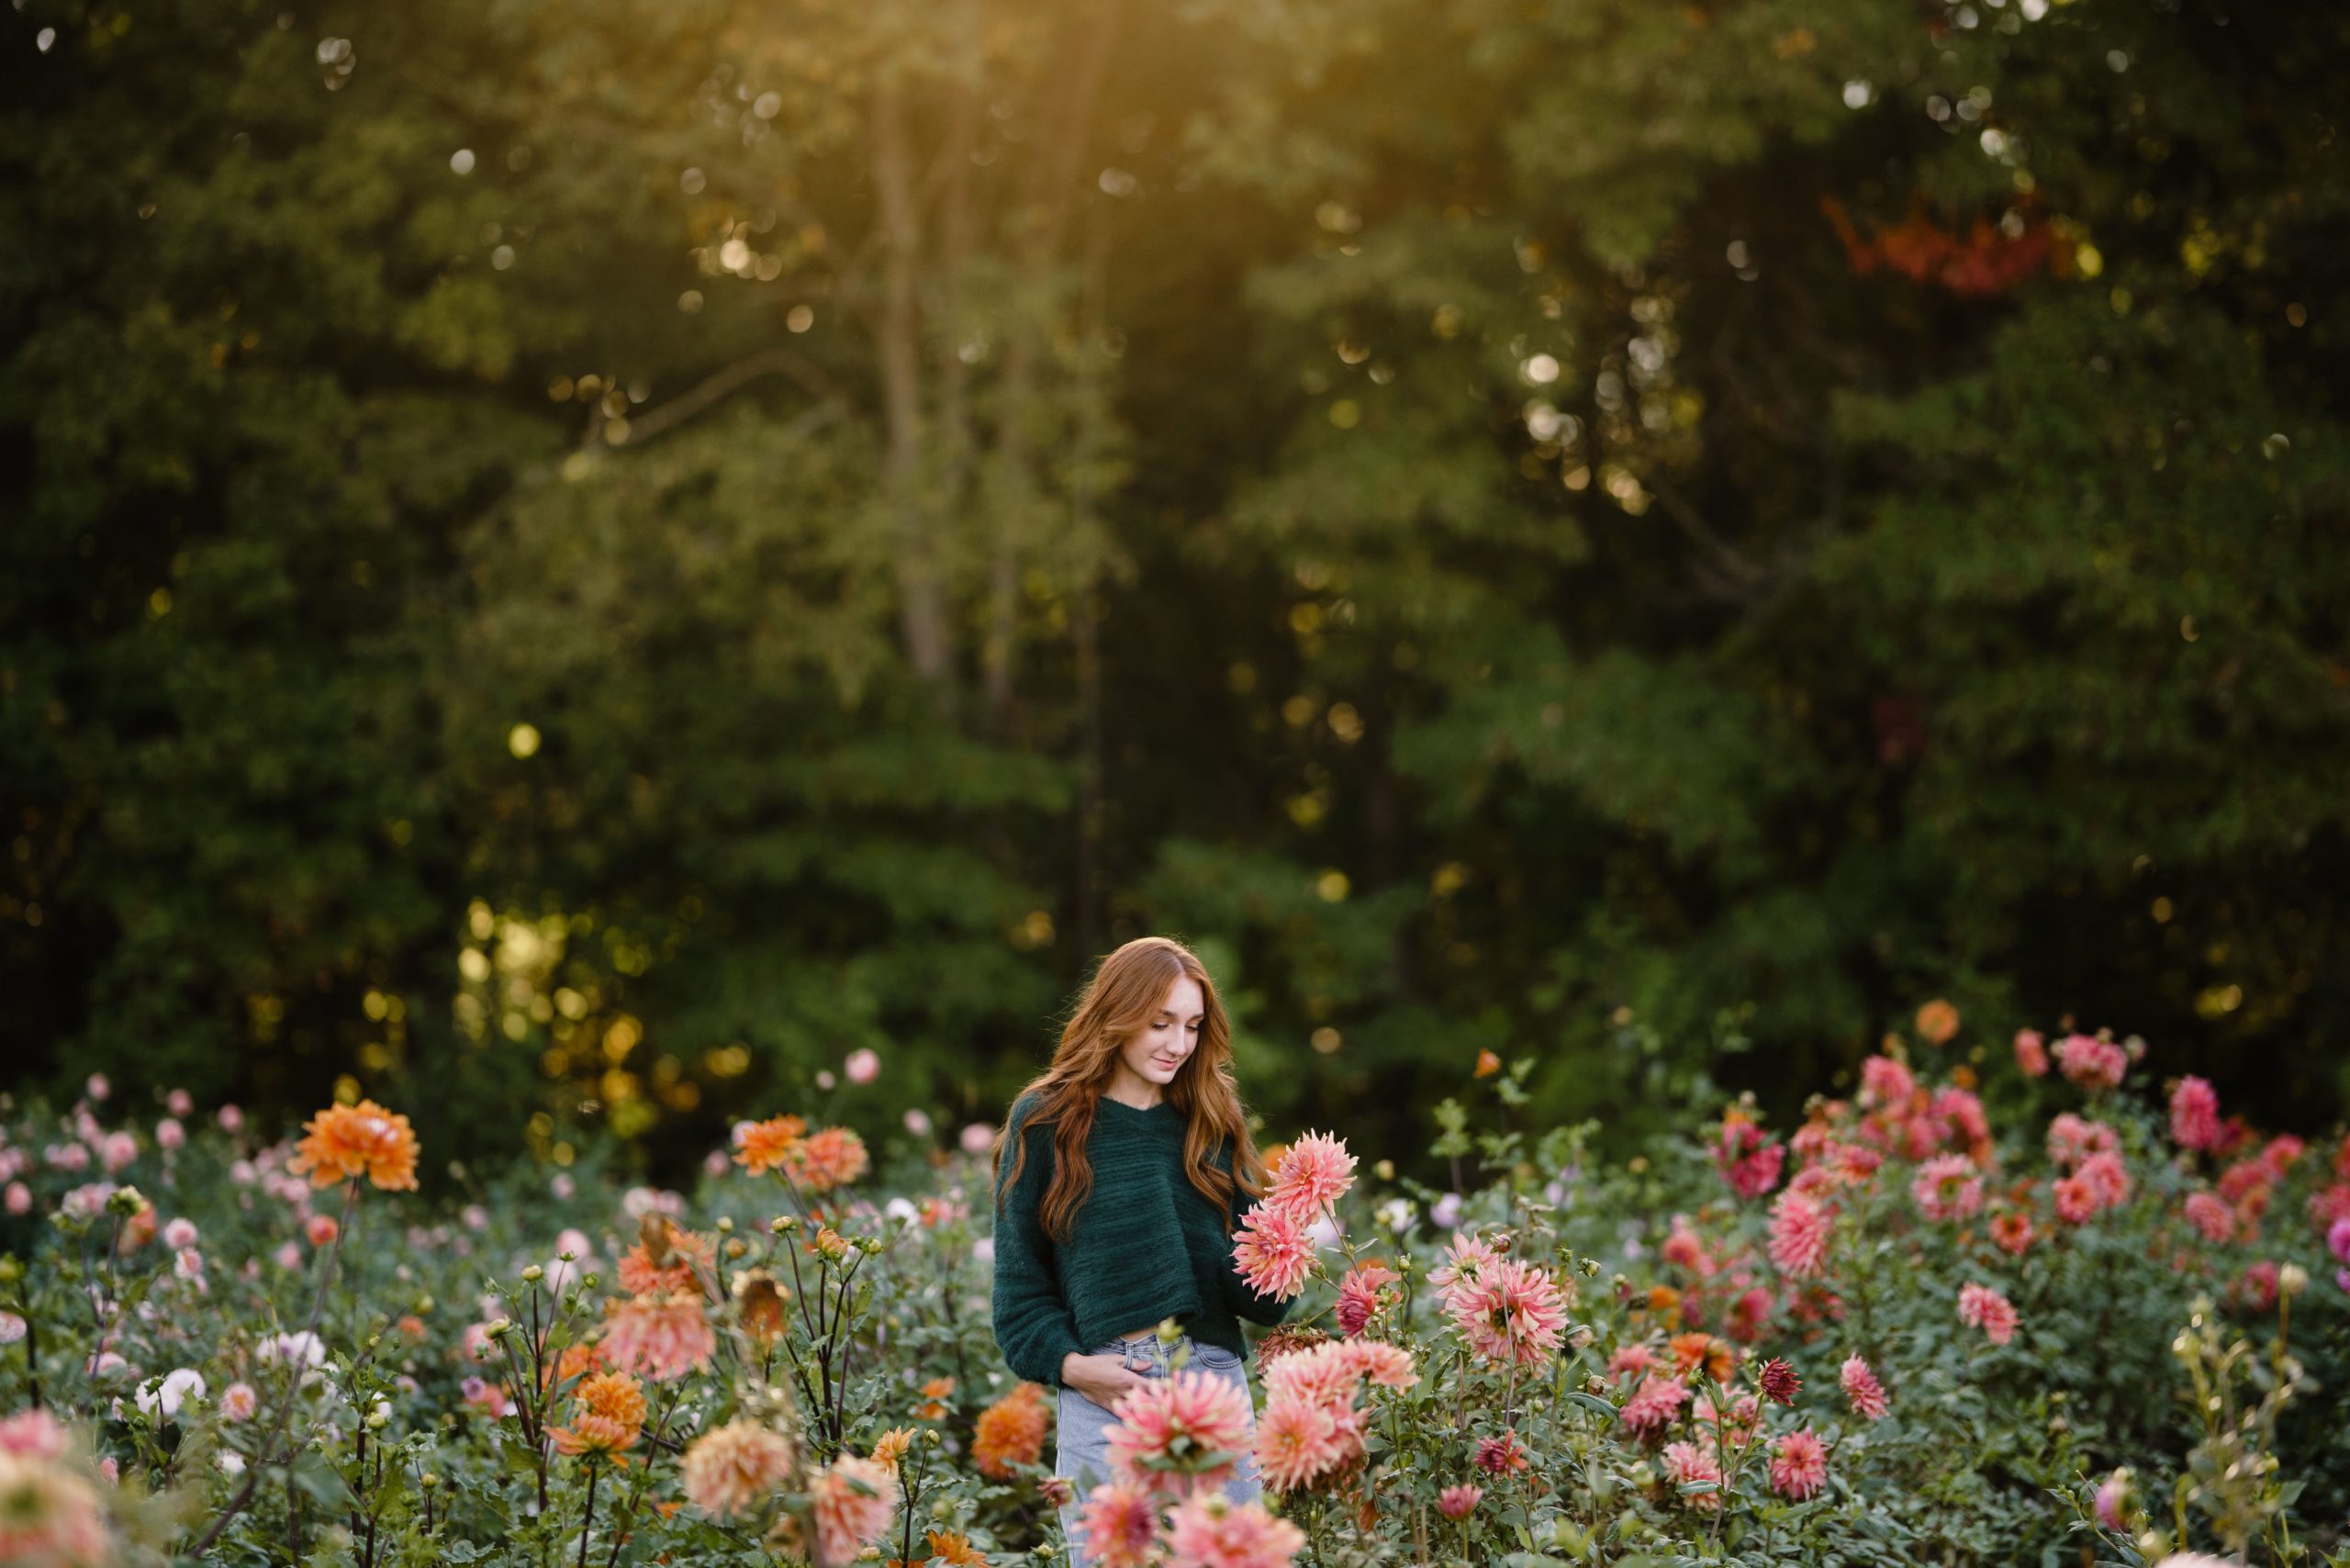 louise looks down while standing in a field of flowers for her senior portrait photography